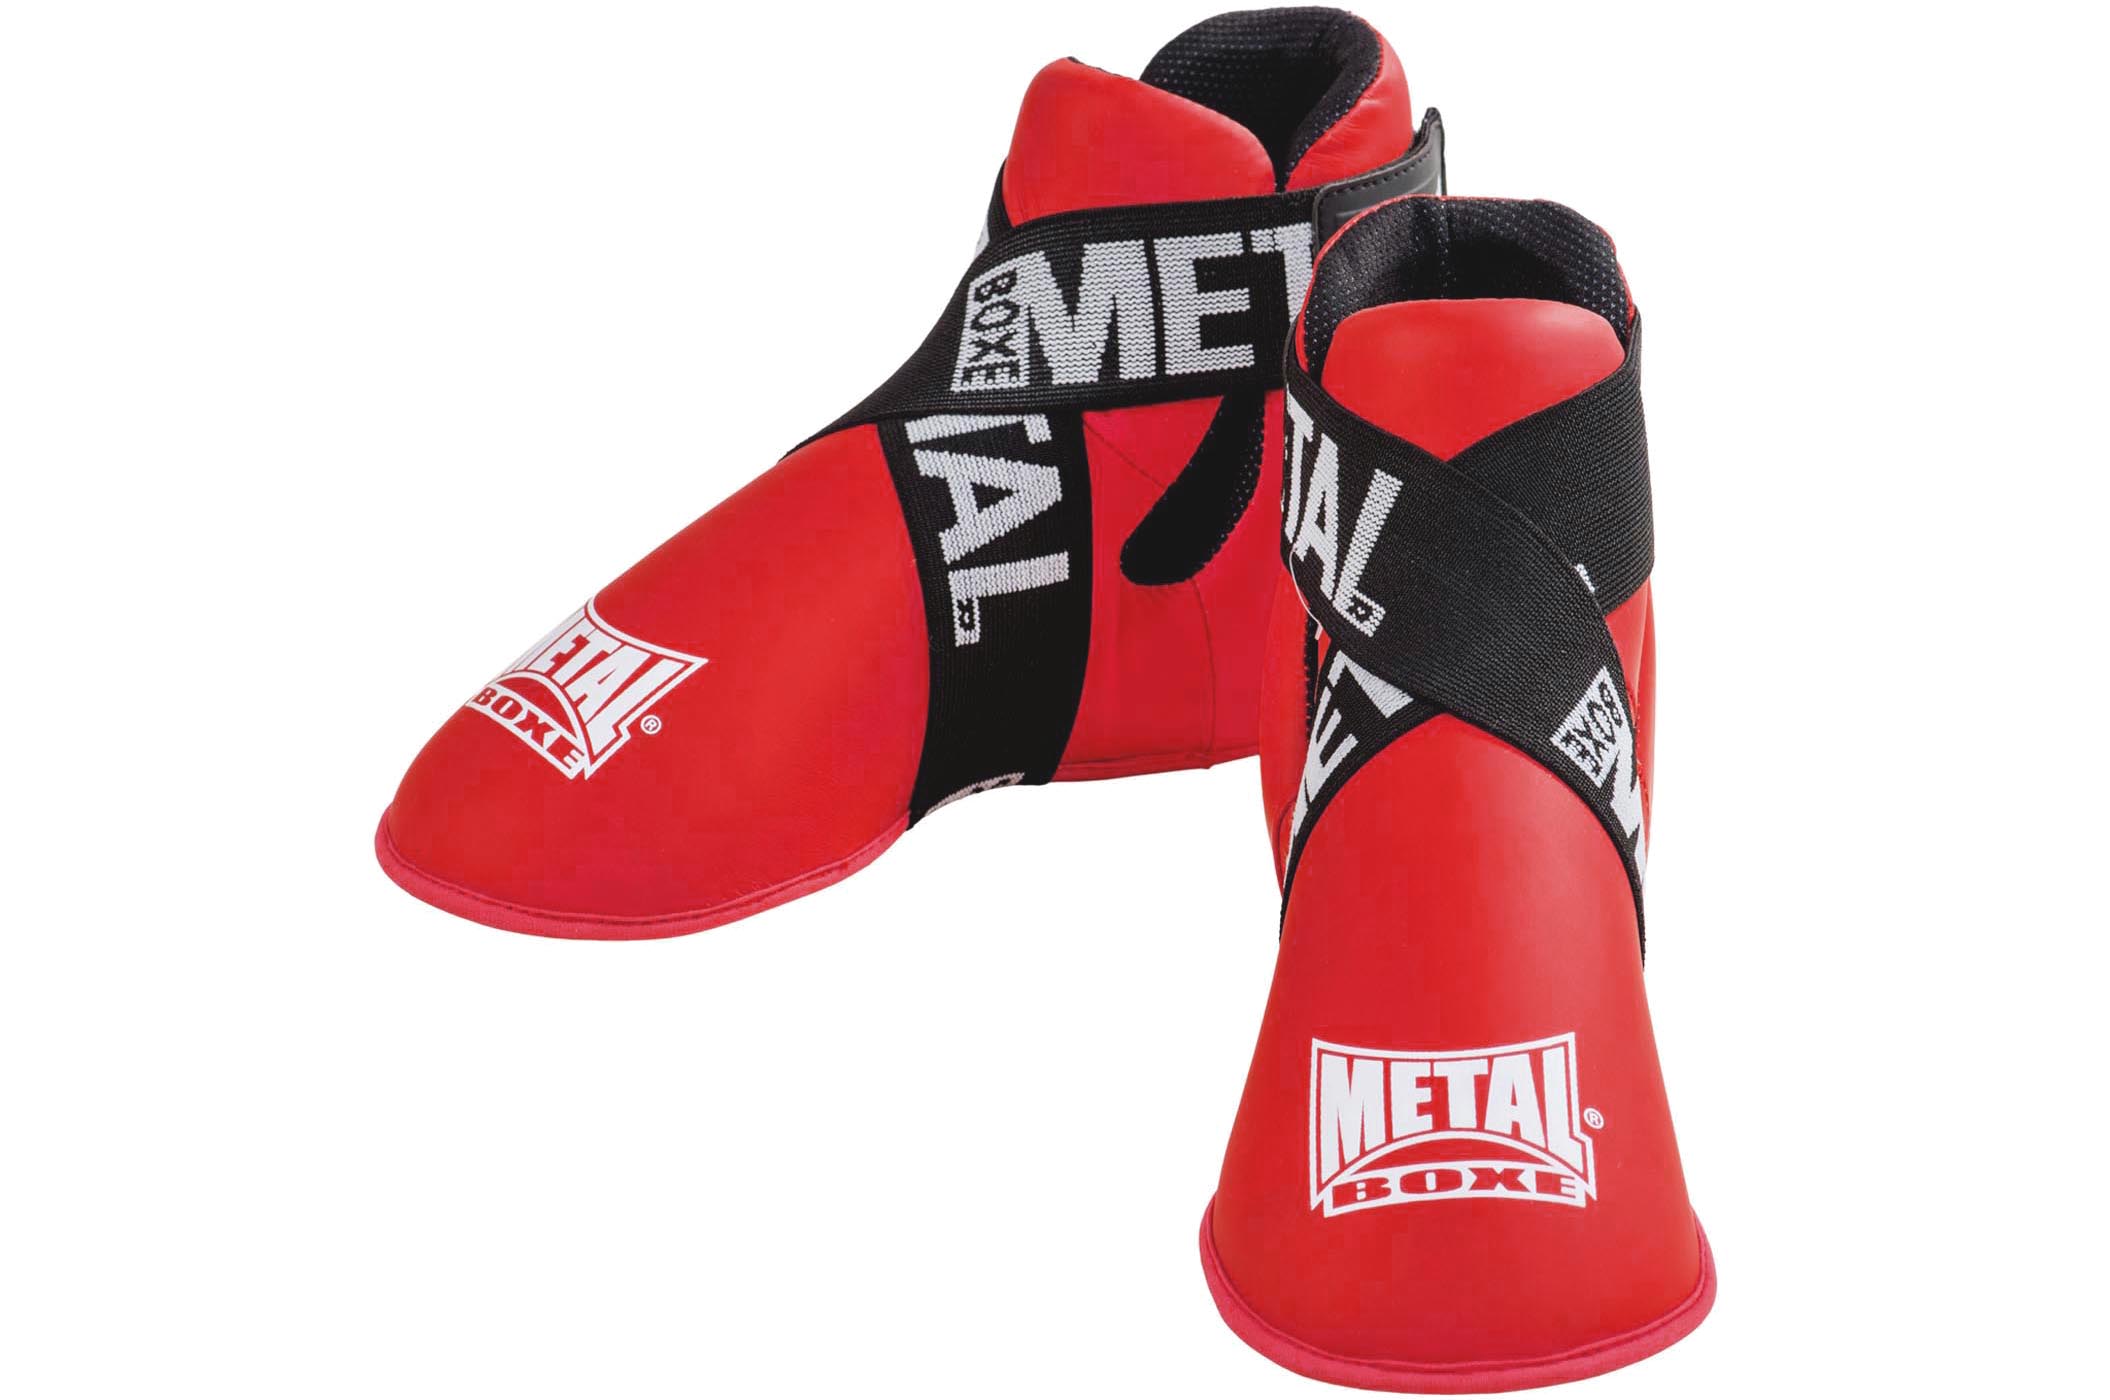 Protège pieds, Full Contact - MB165, Metal Boxe